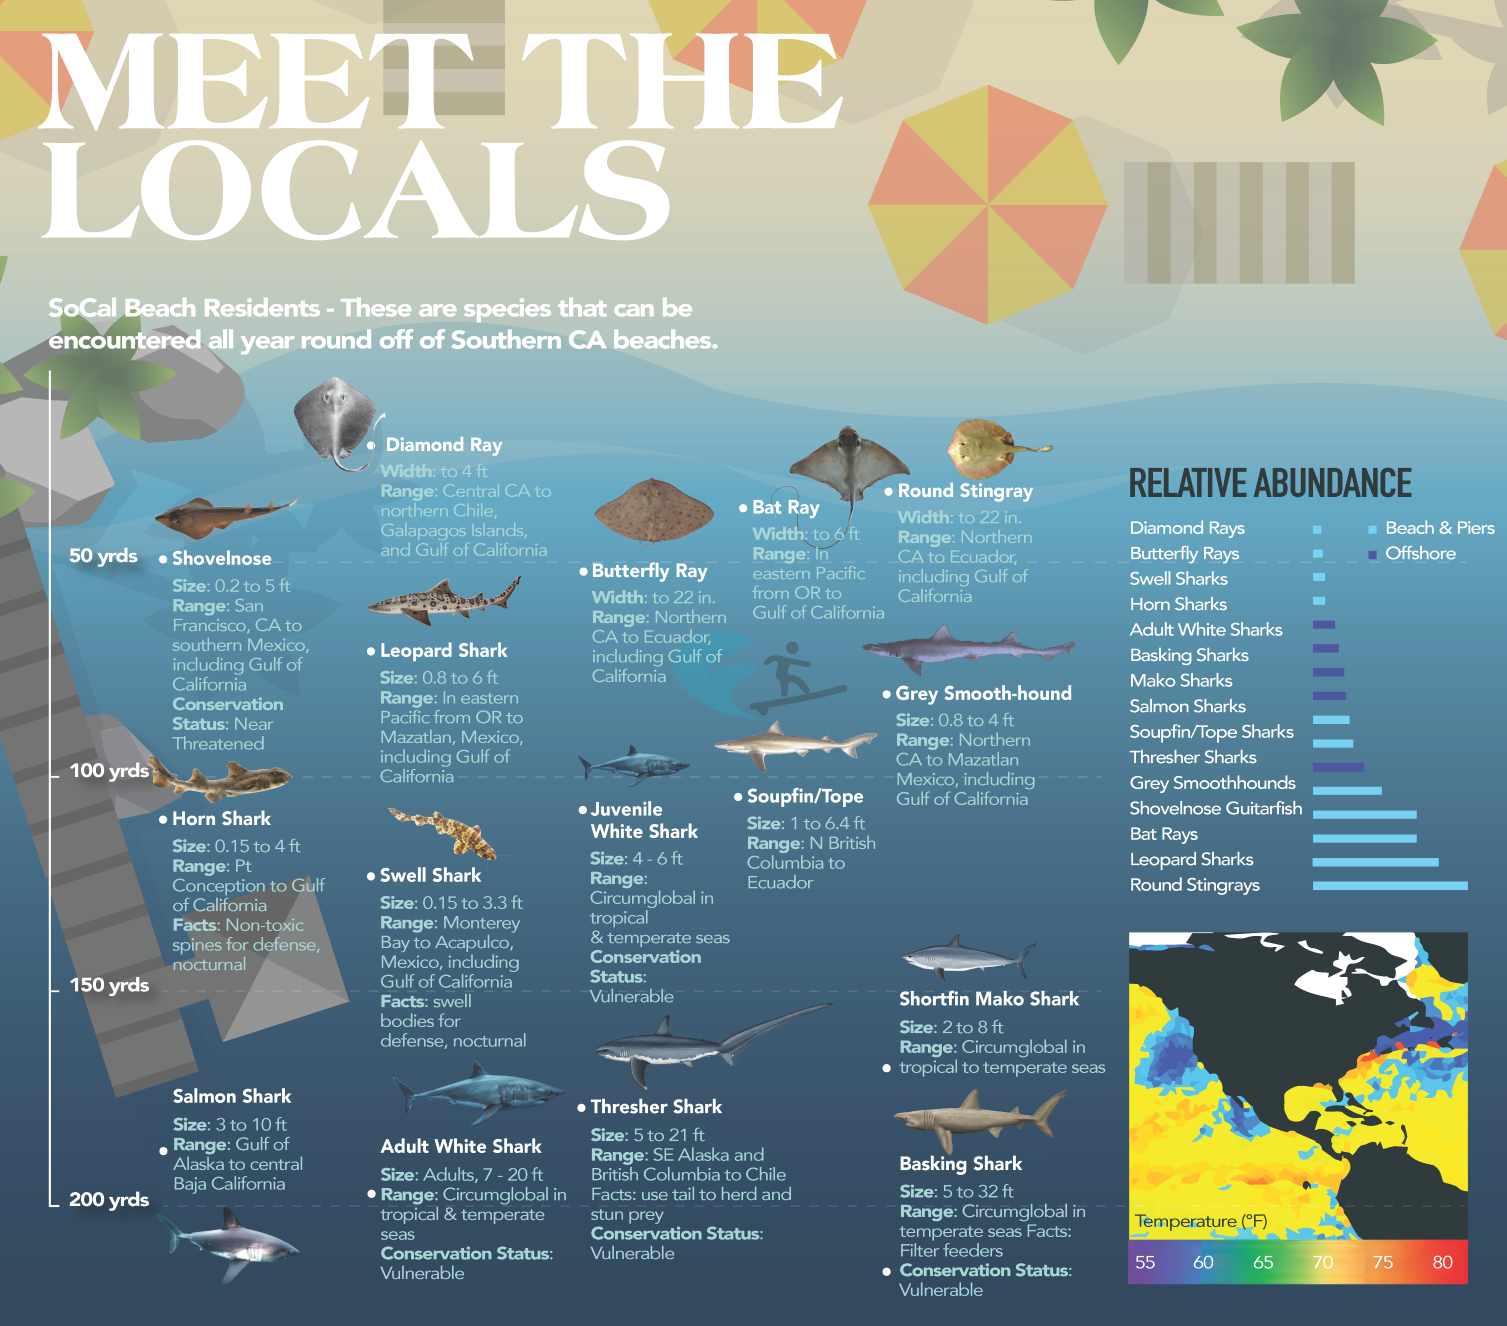 species in our nearby waters